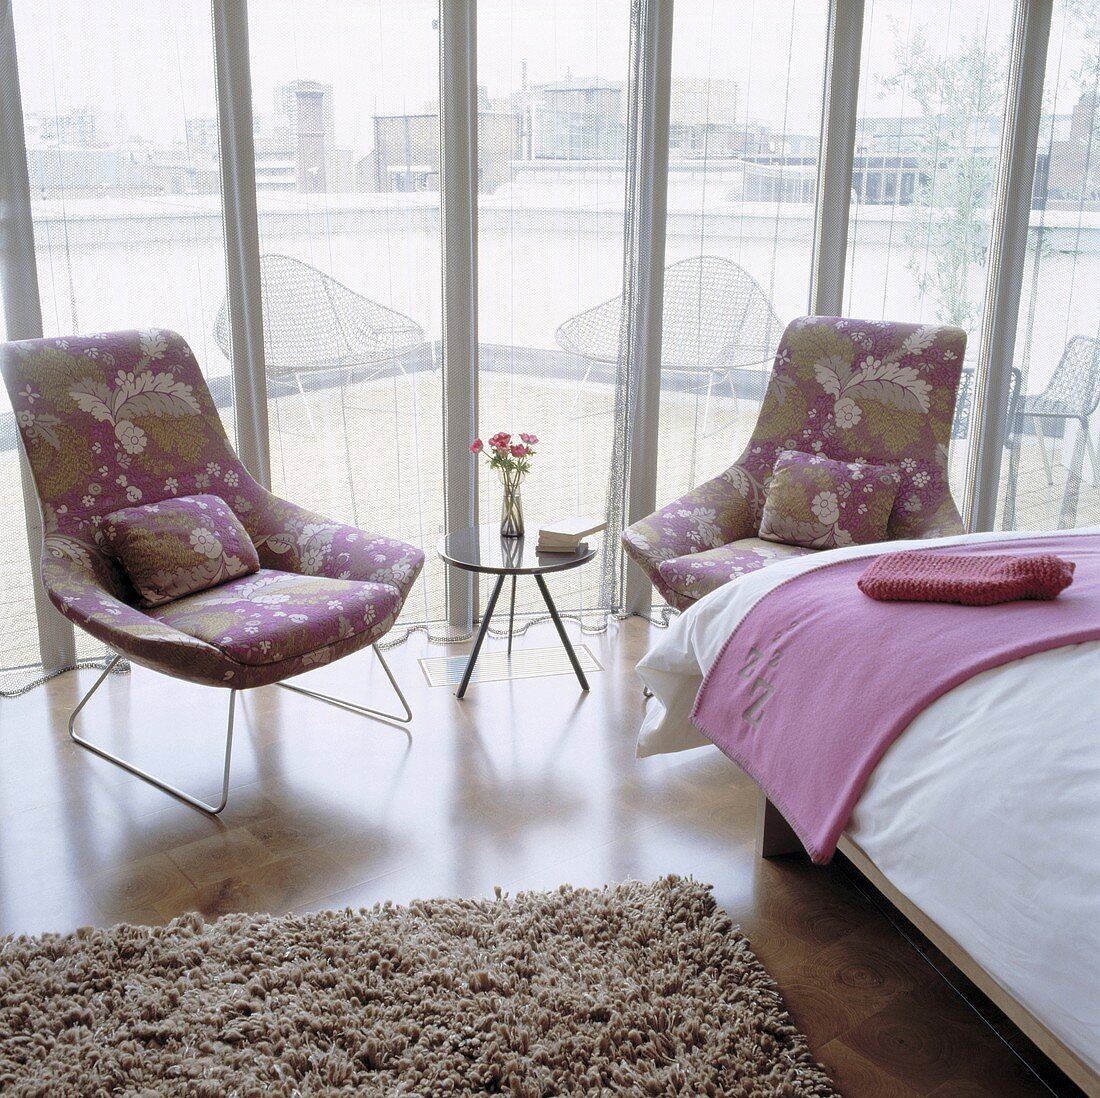 Floral patterned armchairs and a side table in front of a window with a transparent curtain